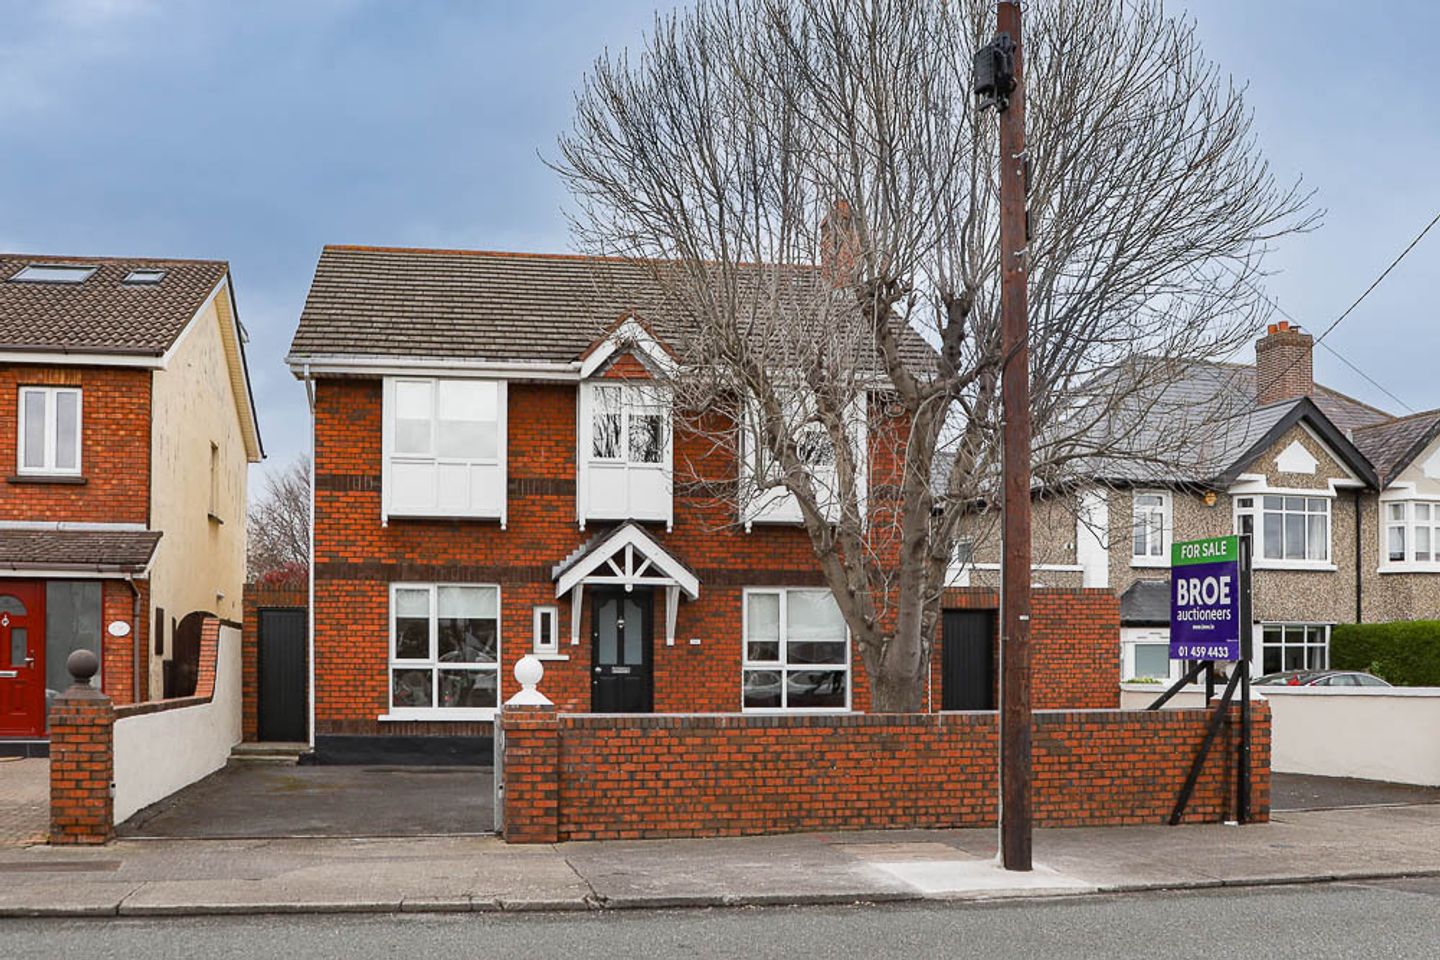 124 Kimmage Road West, Kimmage, Kimmage, Dublin 6W